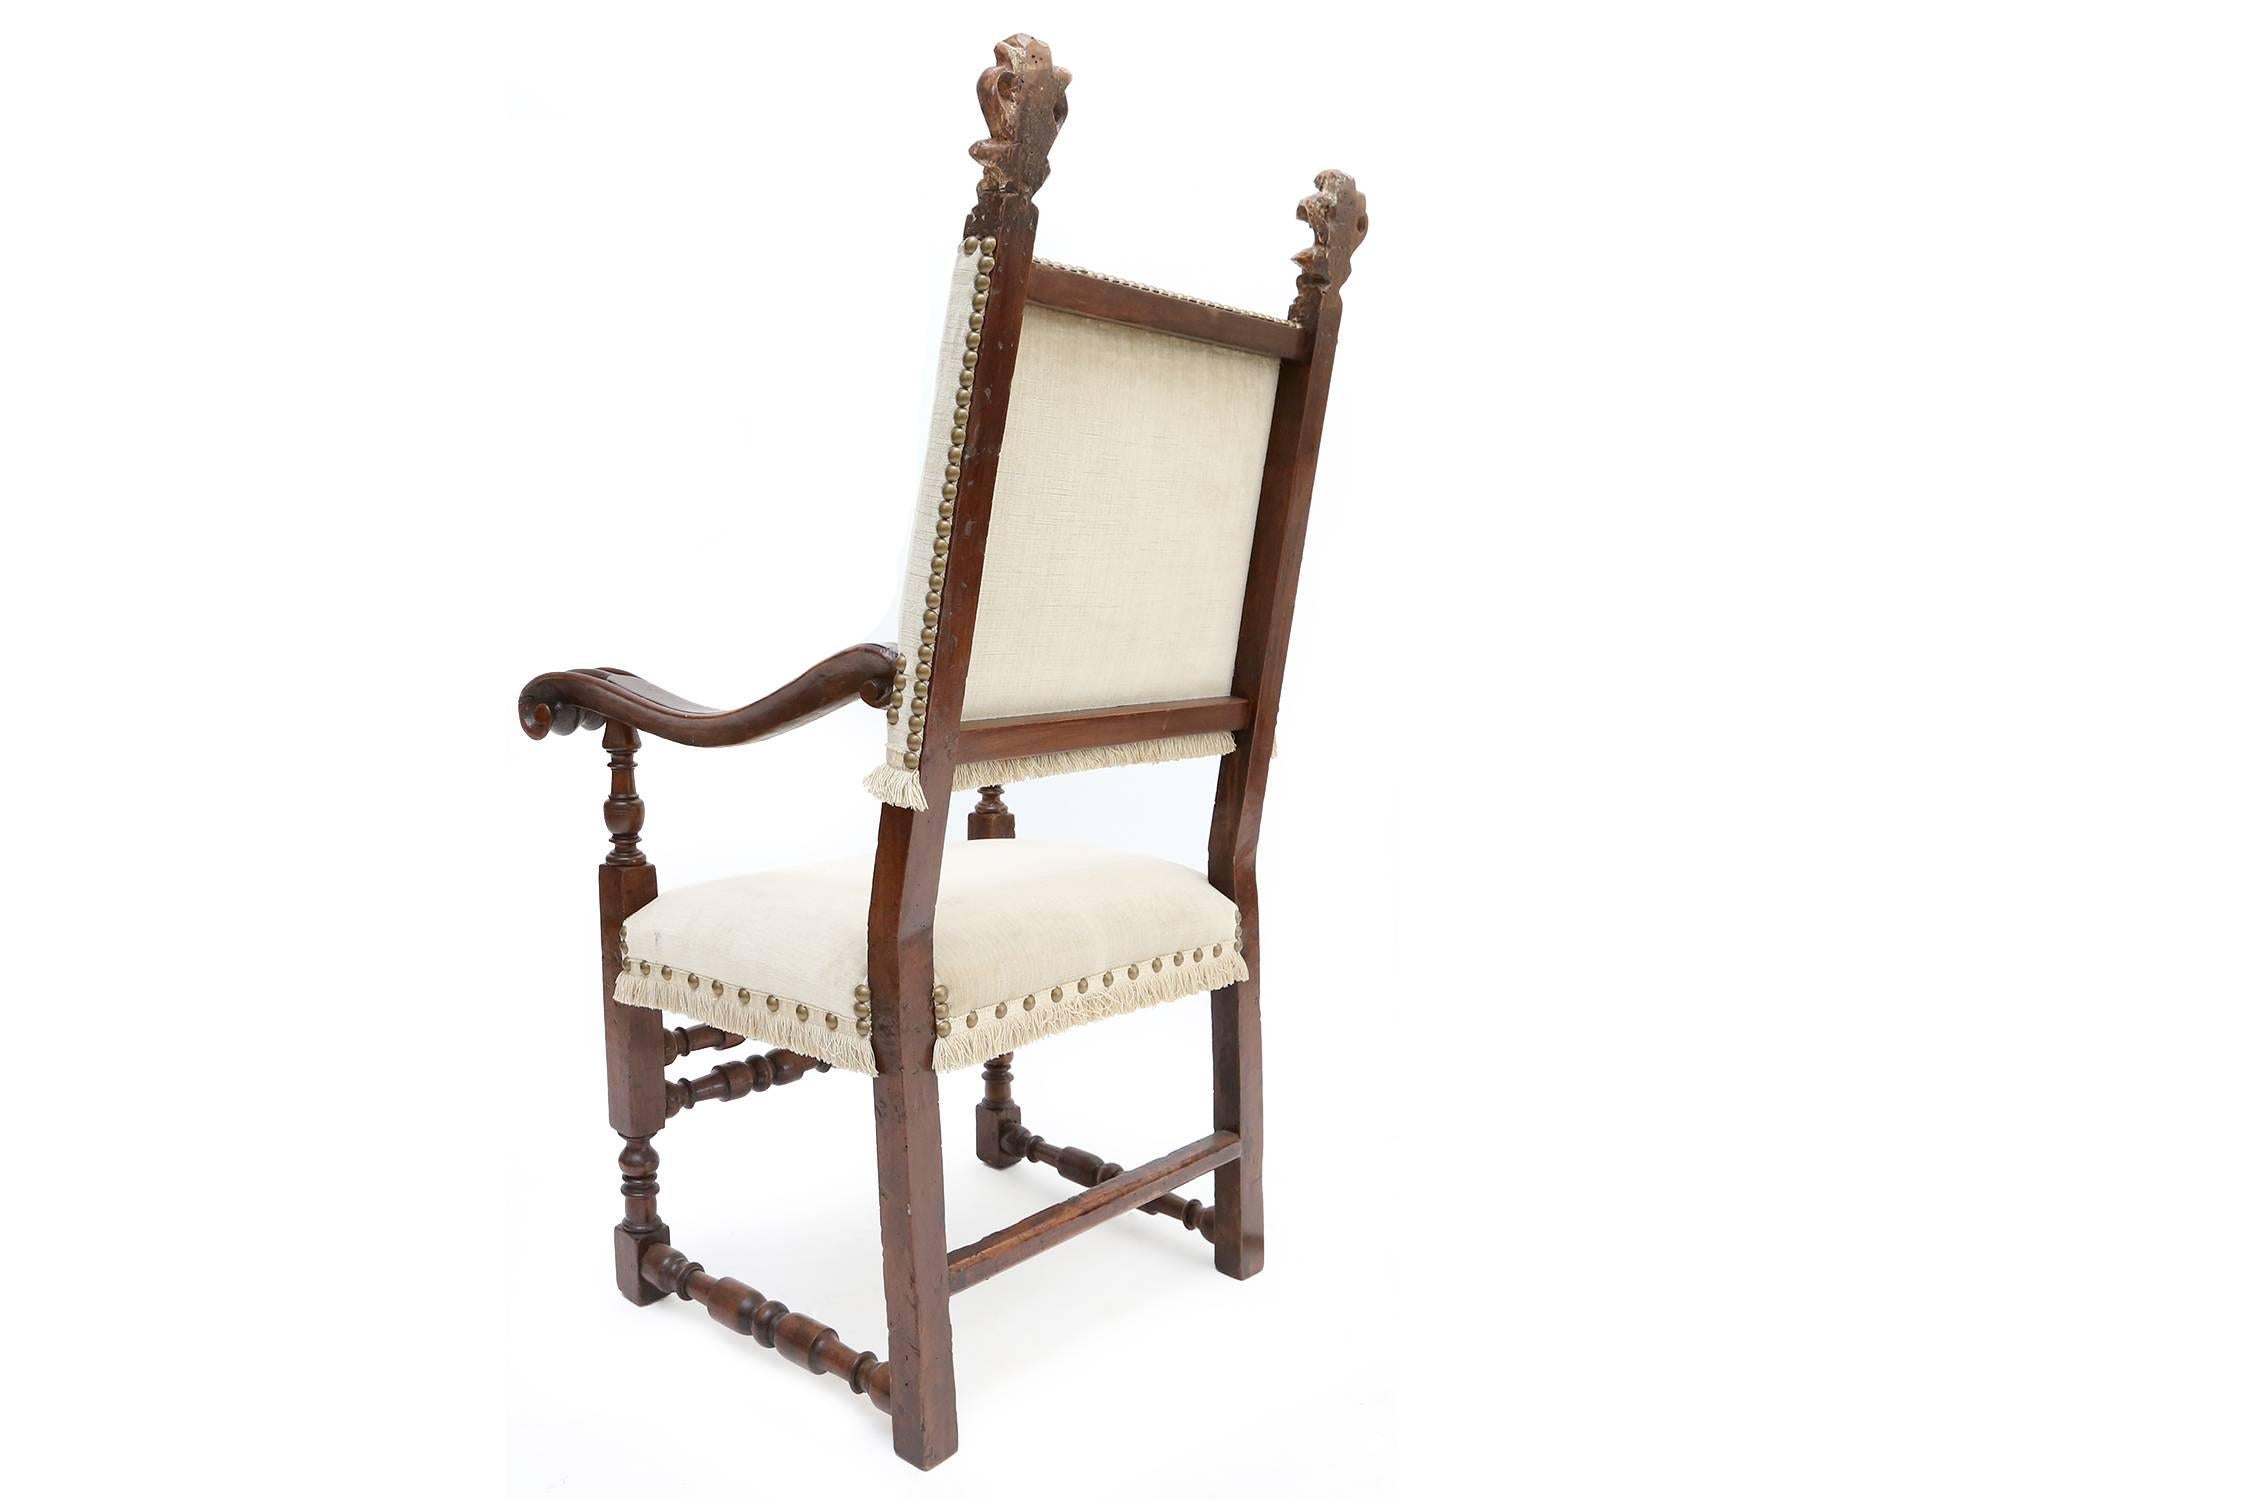 Antique armchair,
19th century, Late Victorian
Hand-carved, hand-turned.
Cream white velvet upholstery.
Crested back.
Measures: H 126 cm, D 75 cm, W 71 cm.